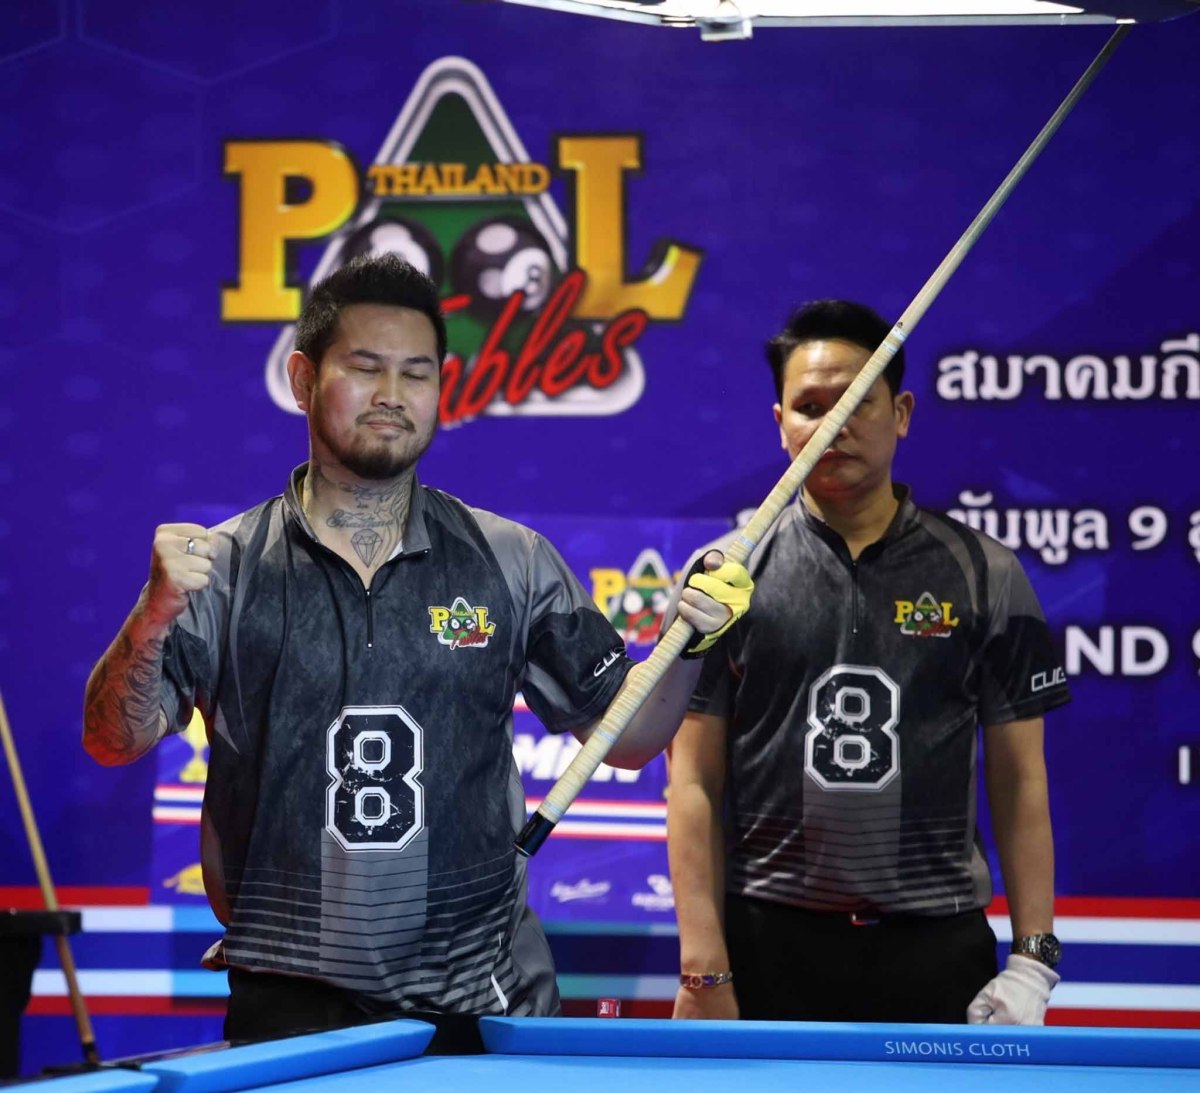 Tanes wins the Thailand 9 Ball National Championship